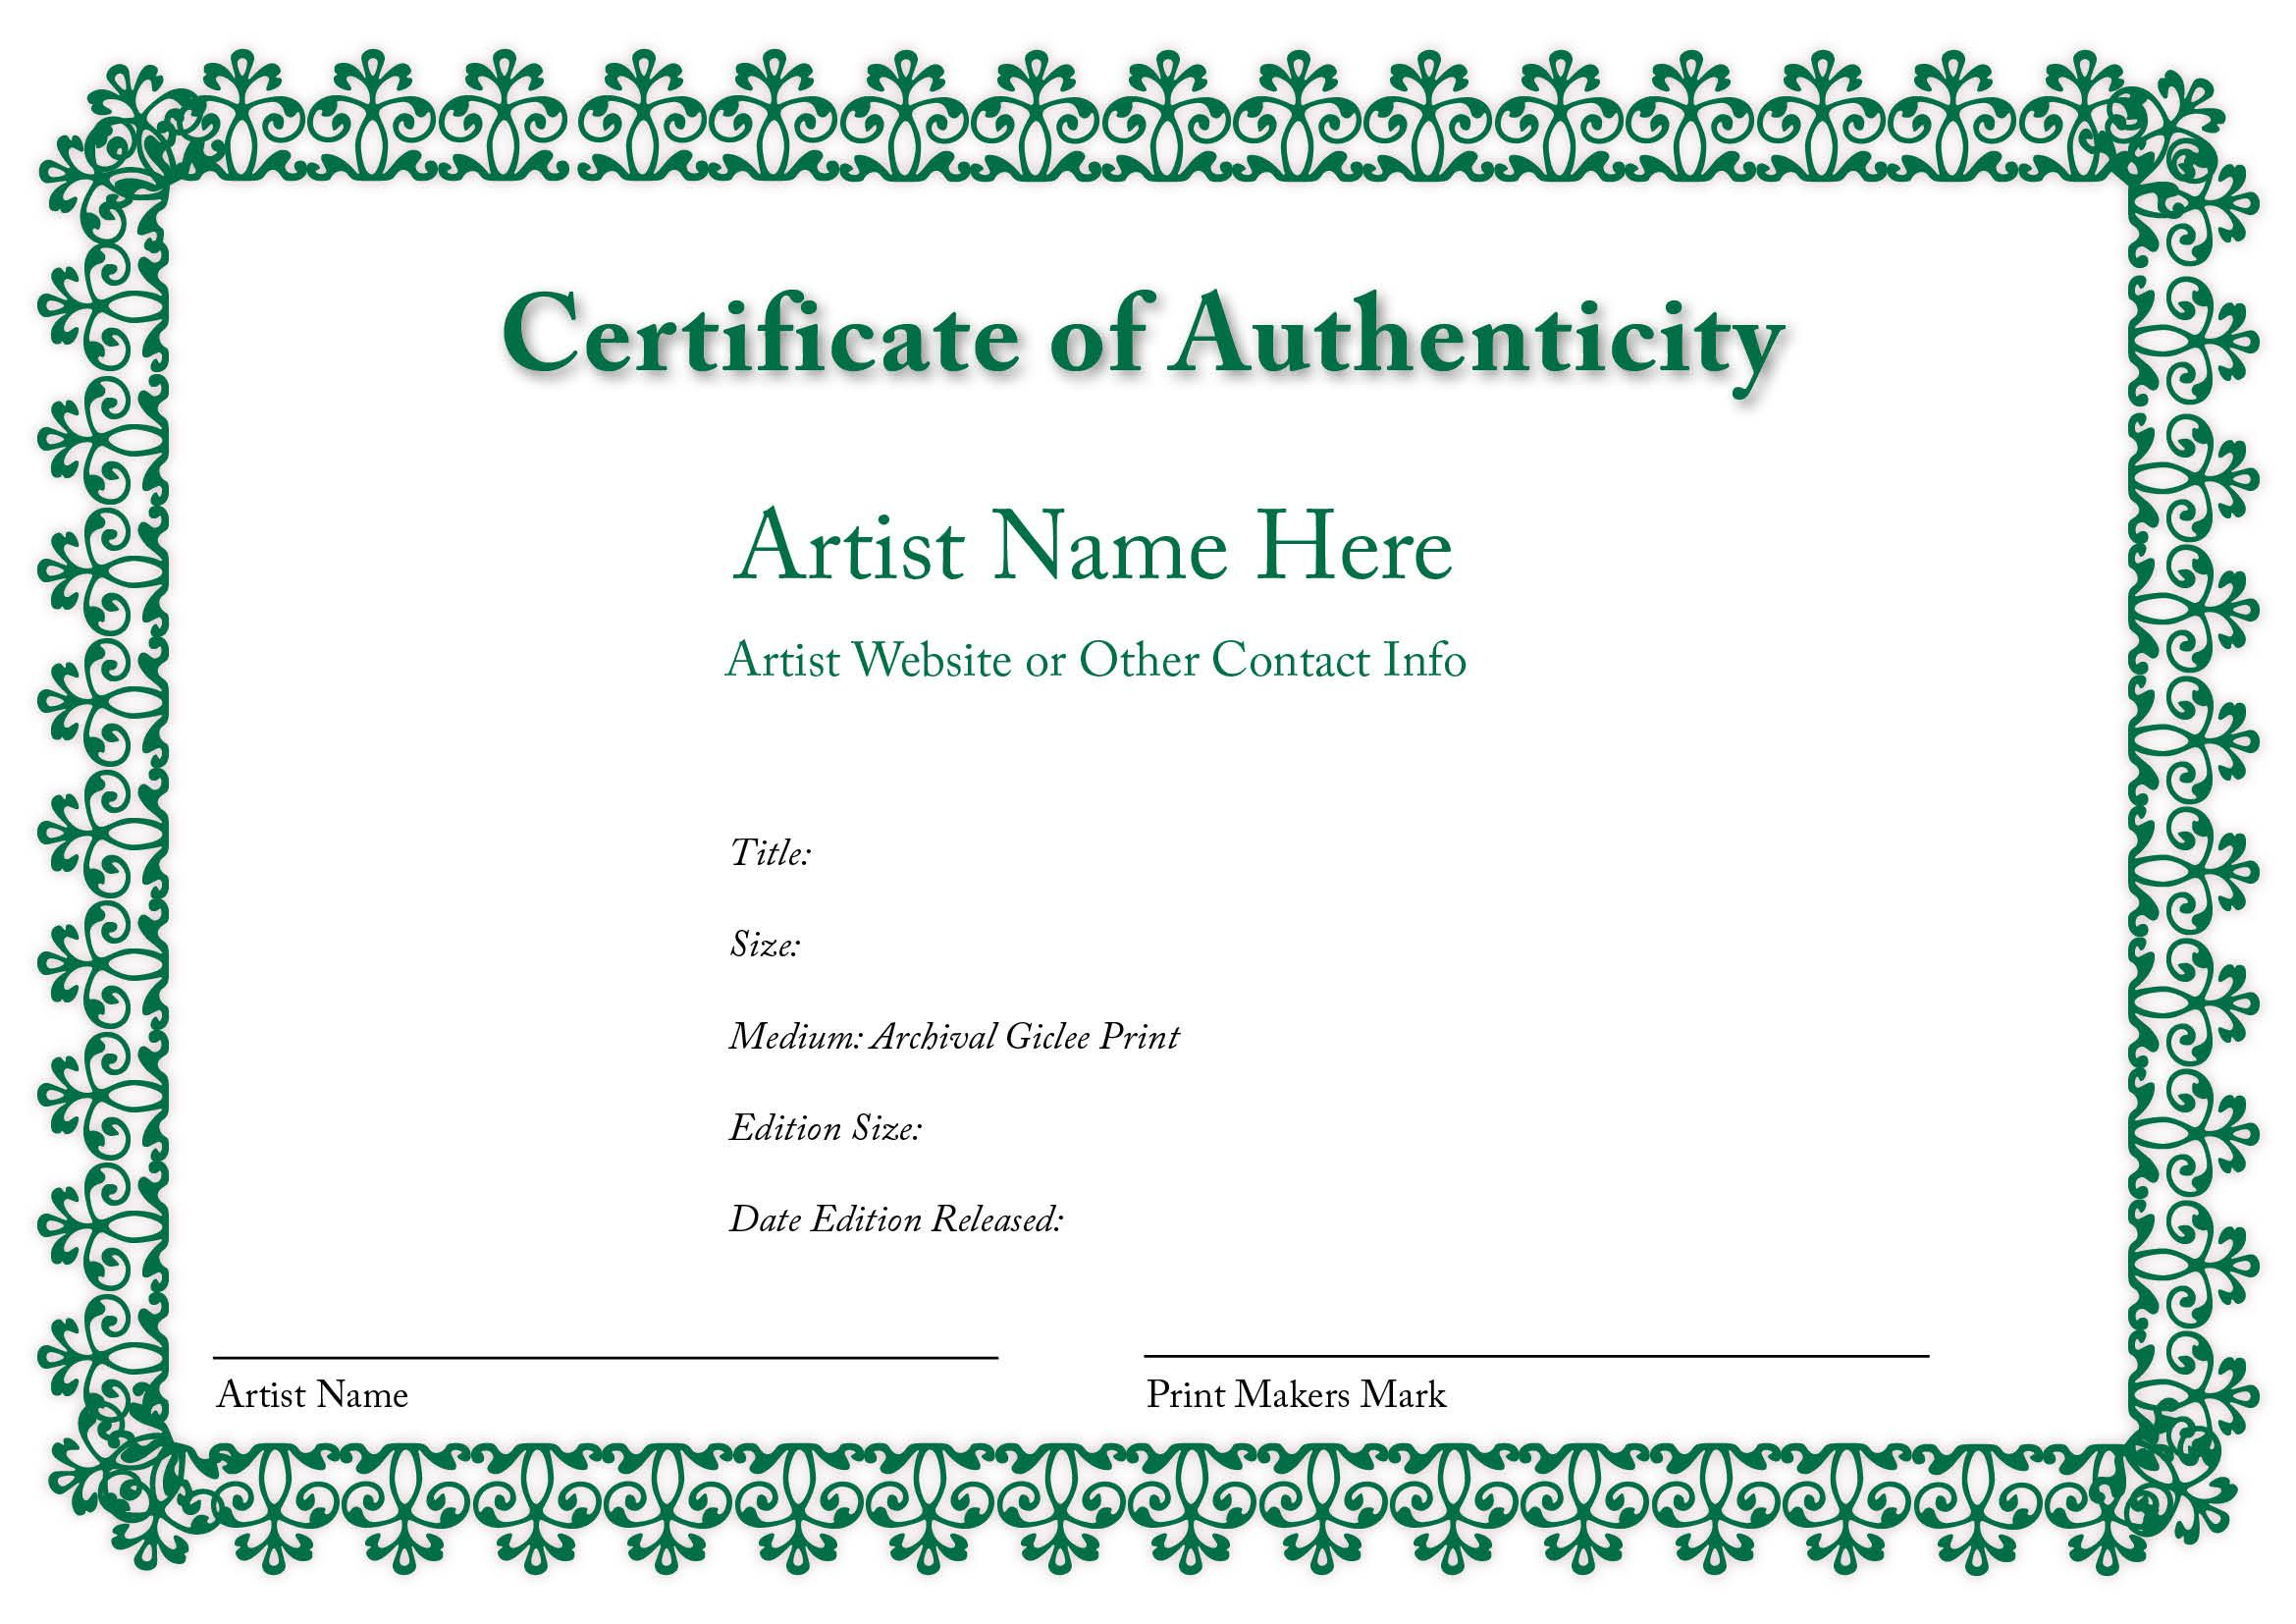 Certificate Of Authenticity Of An Art Print | Certificate For Photography Certificate Of Authenticity Template